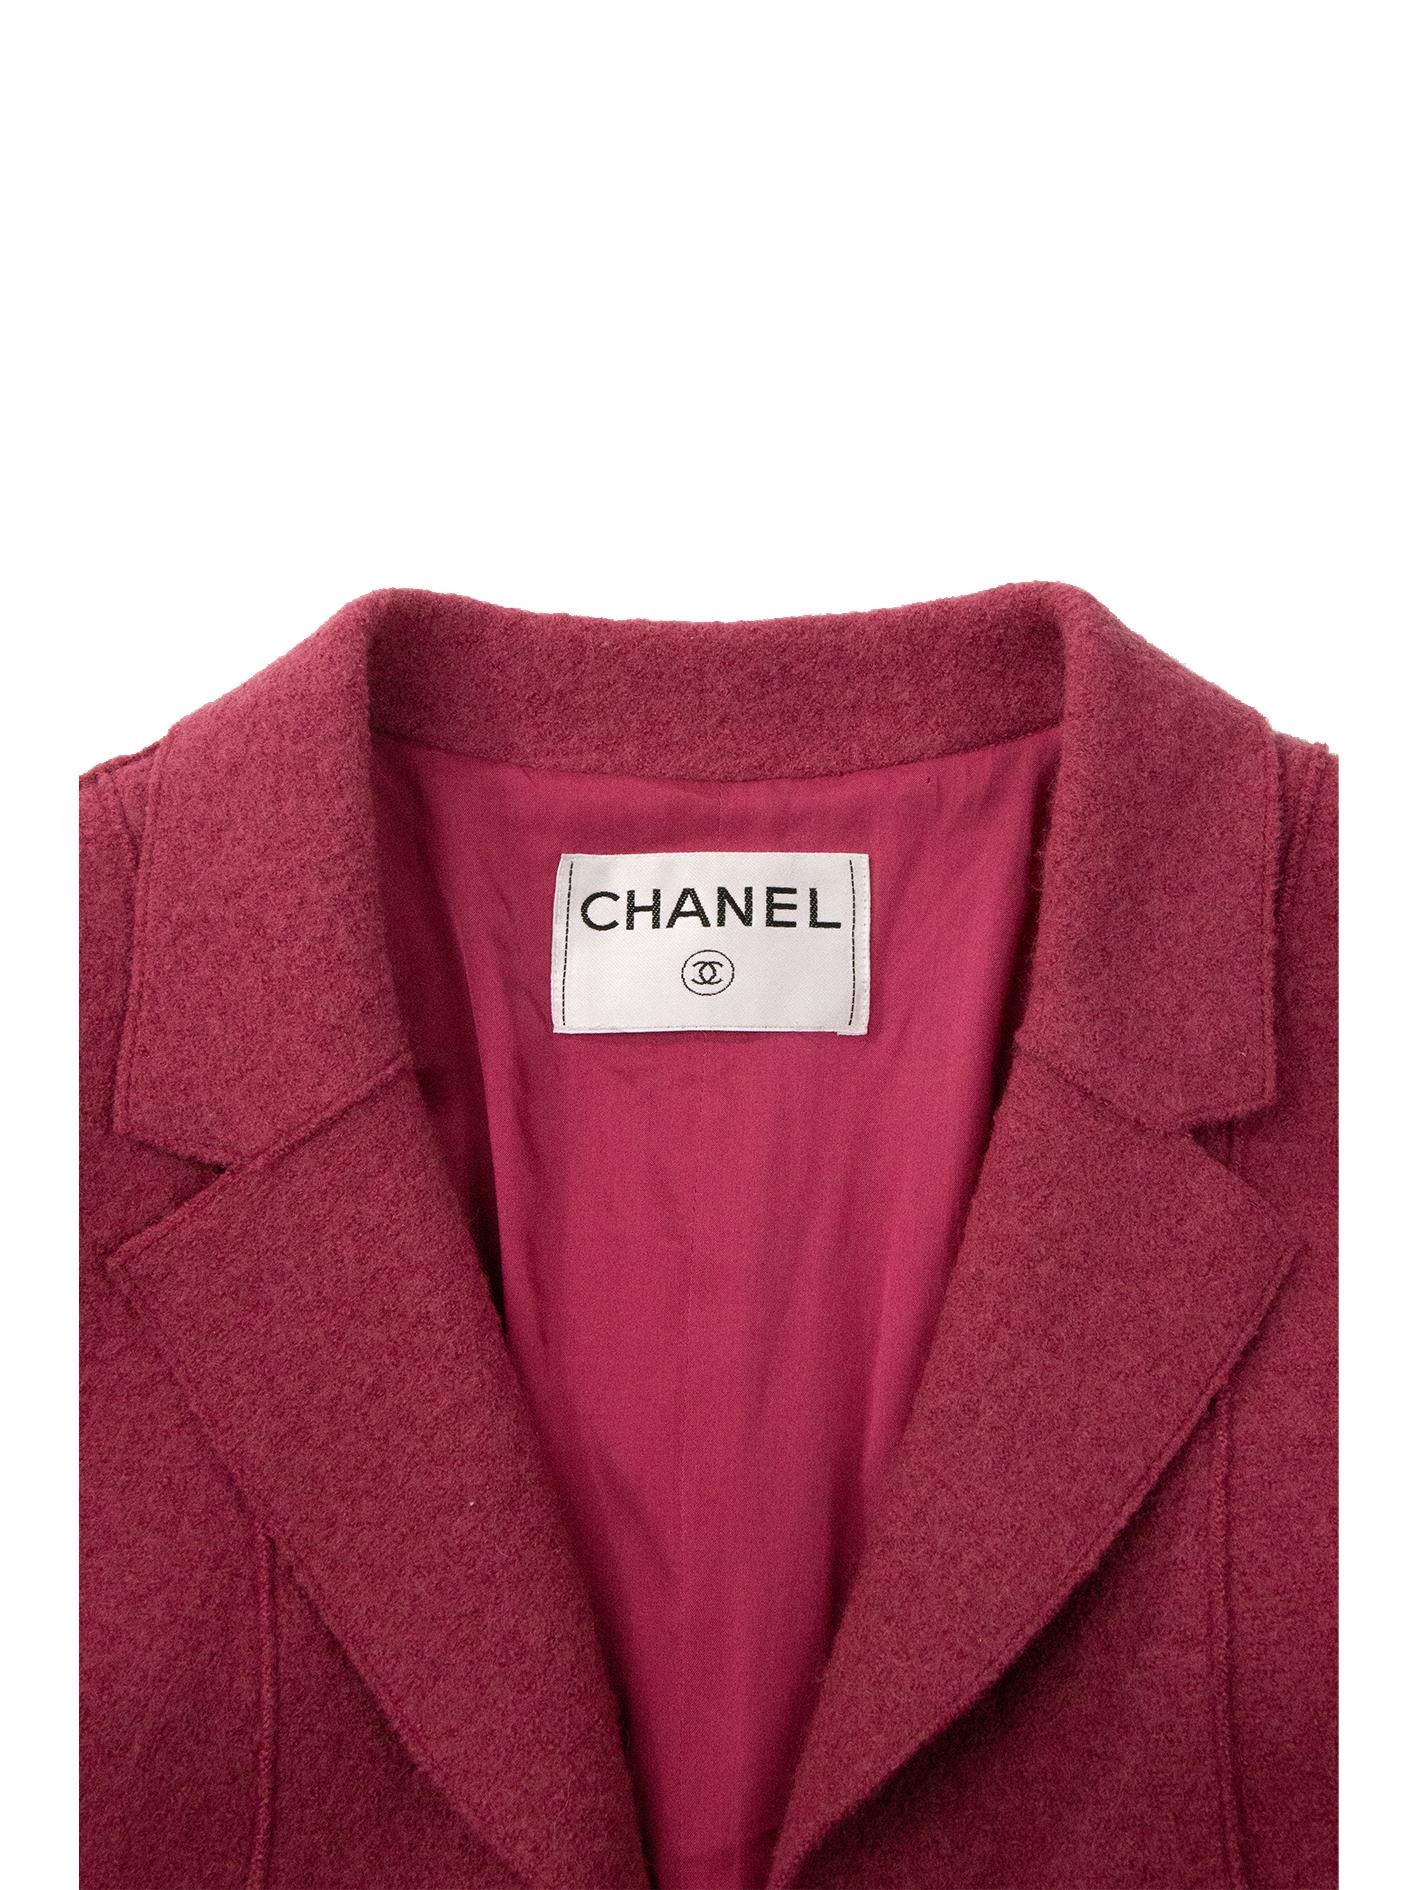 2000s Chanel Punch Pink Jacket For Sale 3